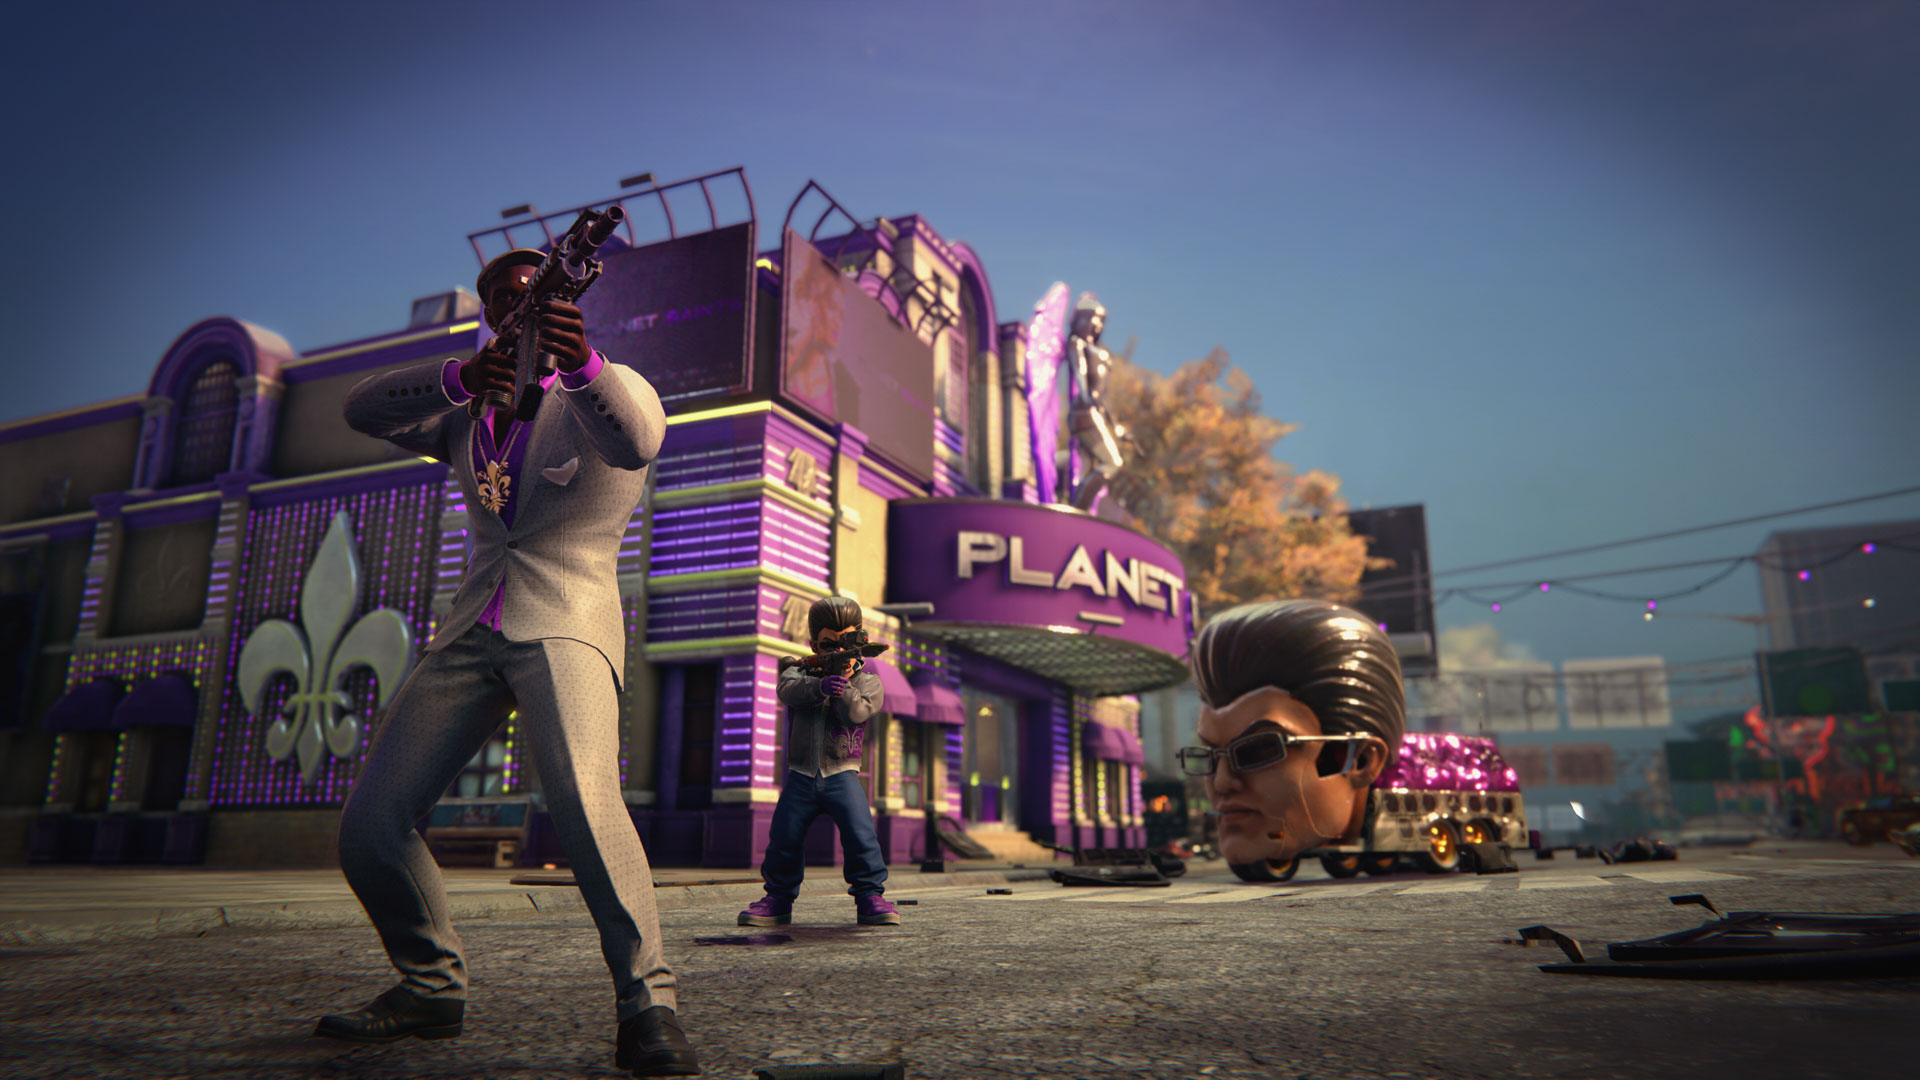 Saints Row: The Third was originally about an undercover agent - Polygon